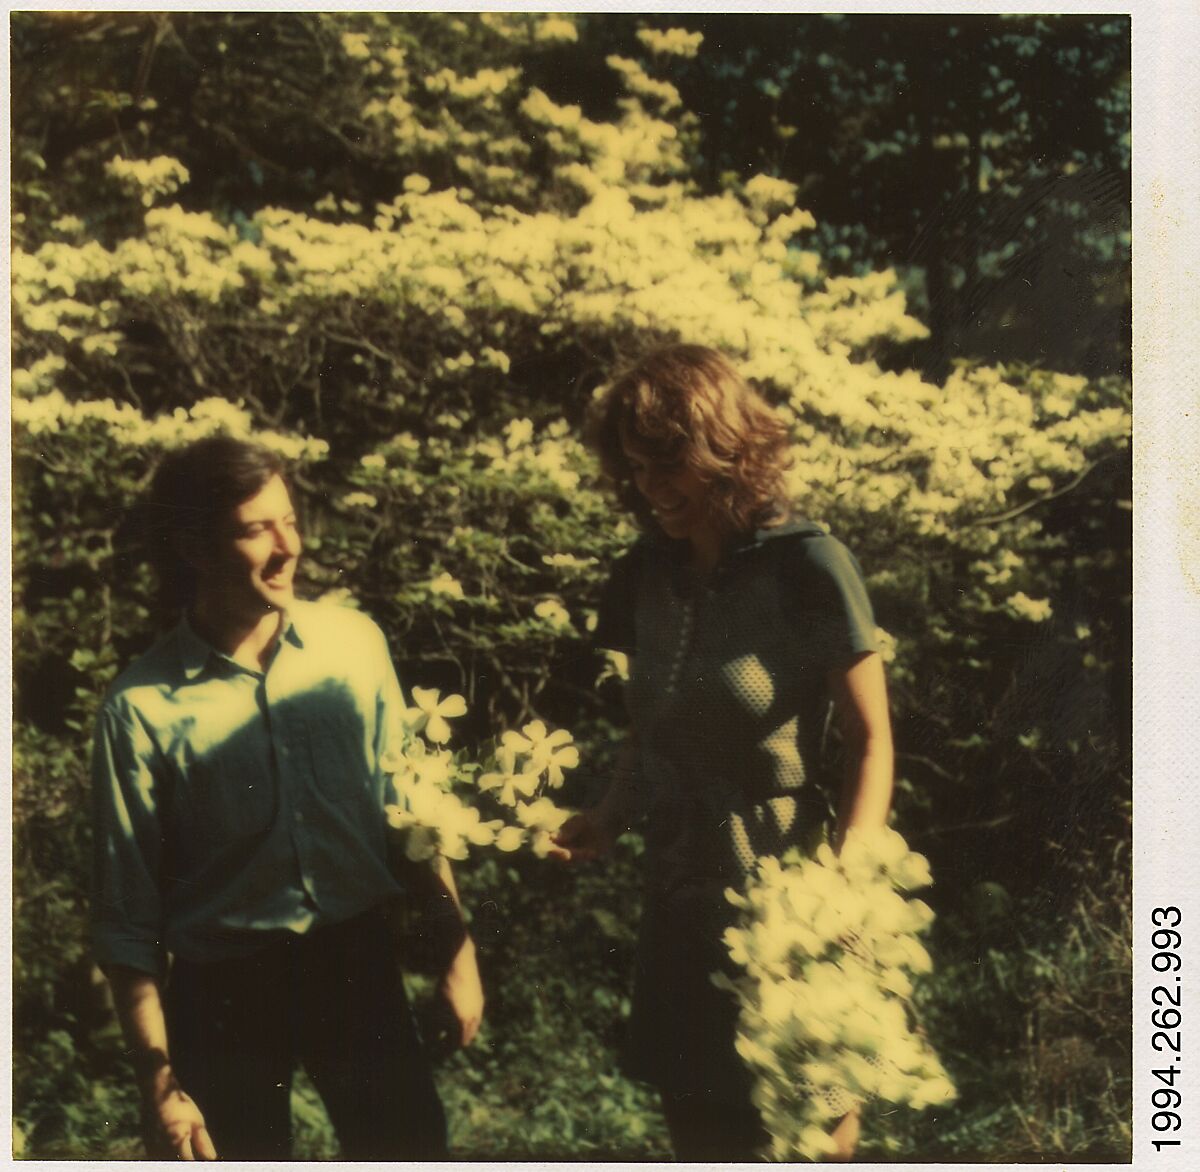 [Jerry Thompson and Jane Corrigan Pruning a Tree], Walker Evans (American, St. Louis, Missouri 1903–1975 New Haven, Connecticut), Instant internal dye diffusion transfer print (Polaroid SX-70) 